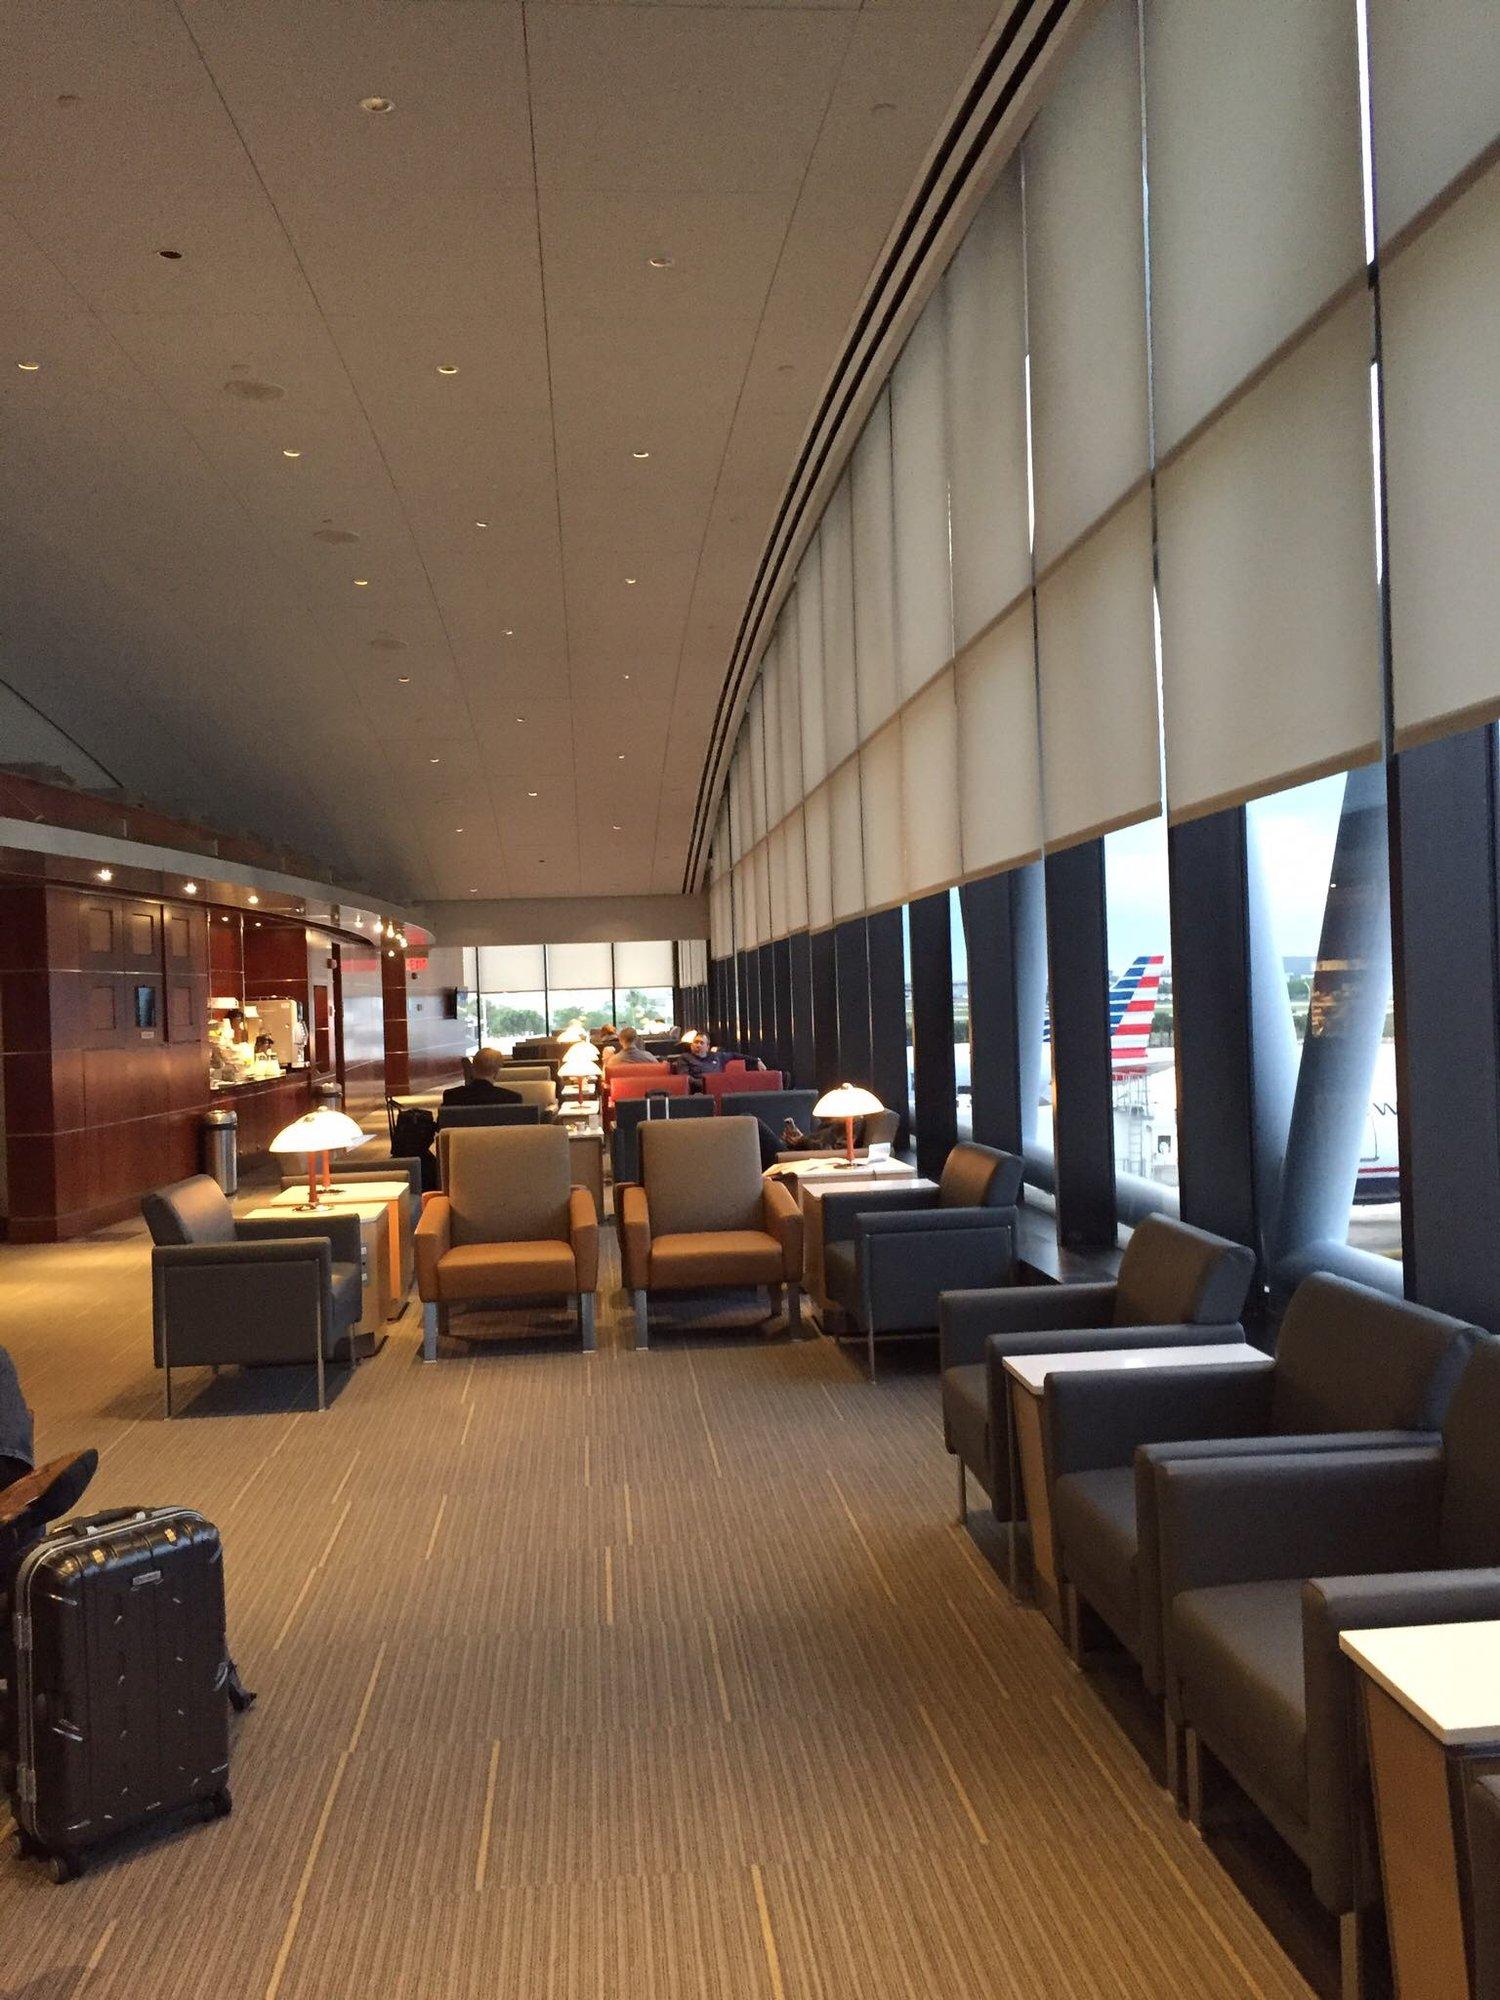 American Airlines Admirals Club image 17 of 20